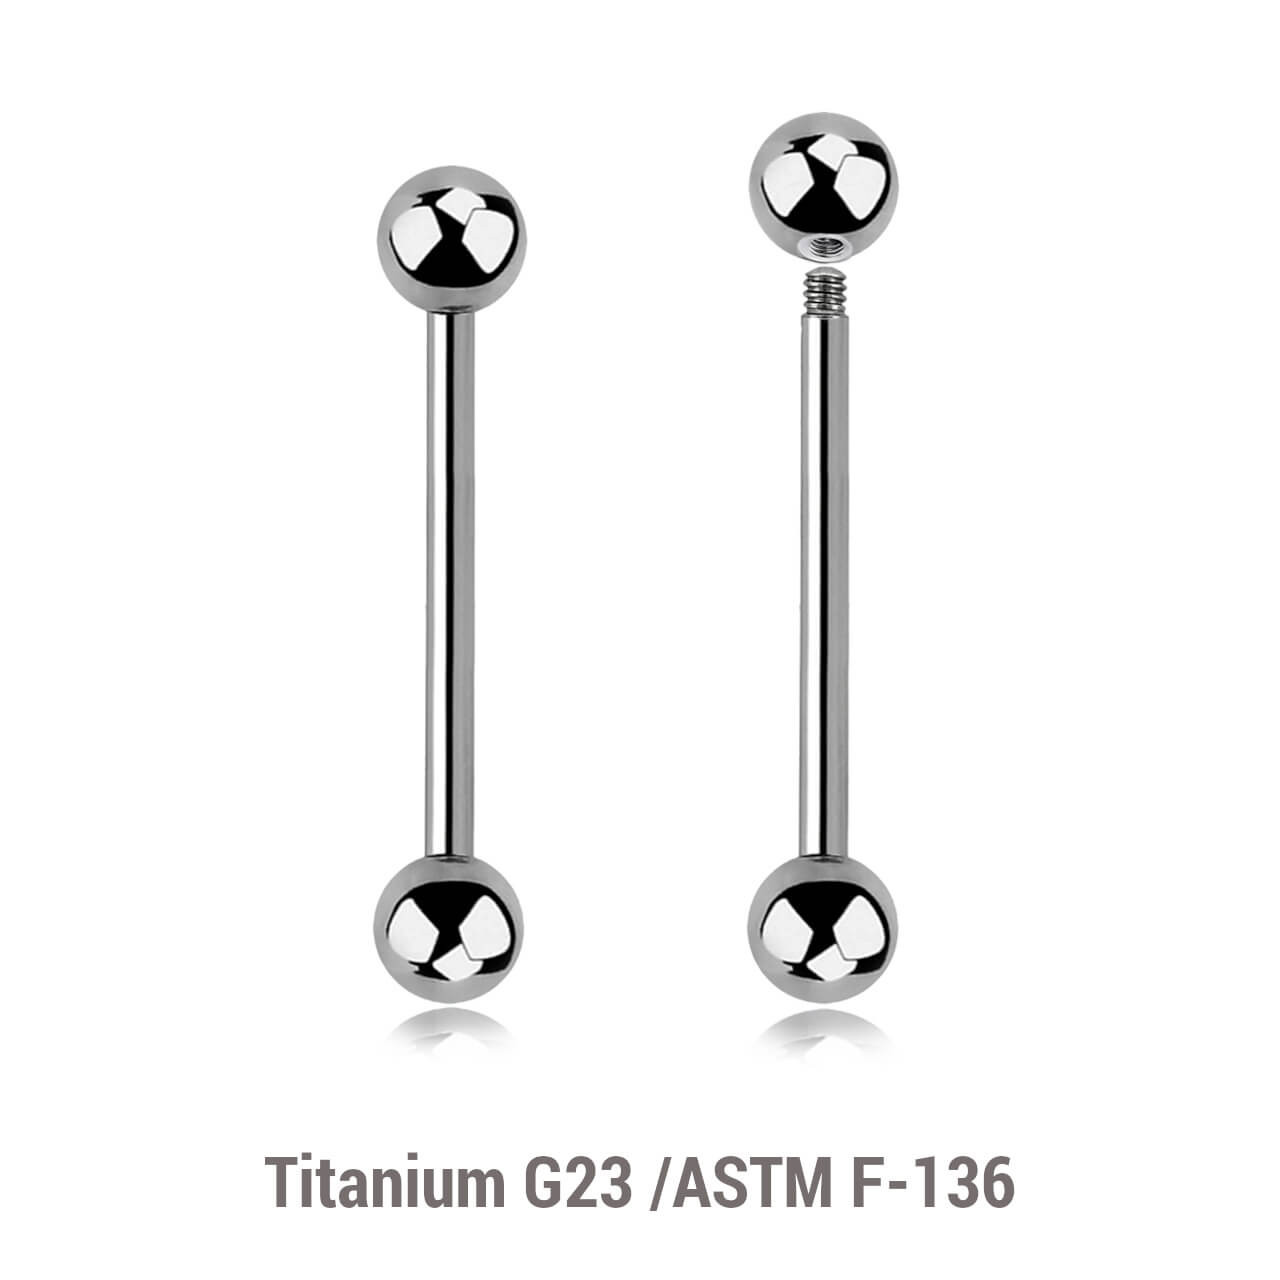 TBA16B5 Wholesale Lot of 10 high polished titanium G23 tongue barbells, Thickness 1.6mm, Ball size 5mm